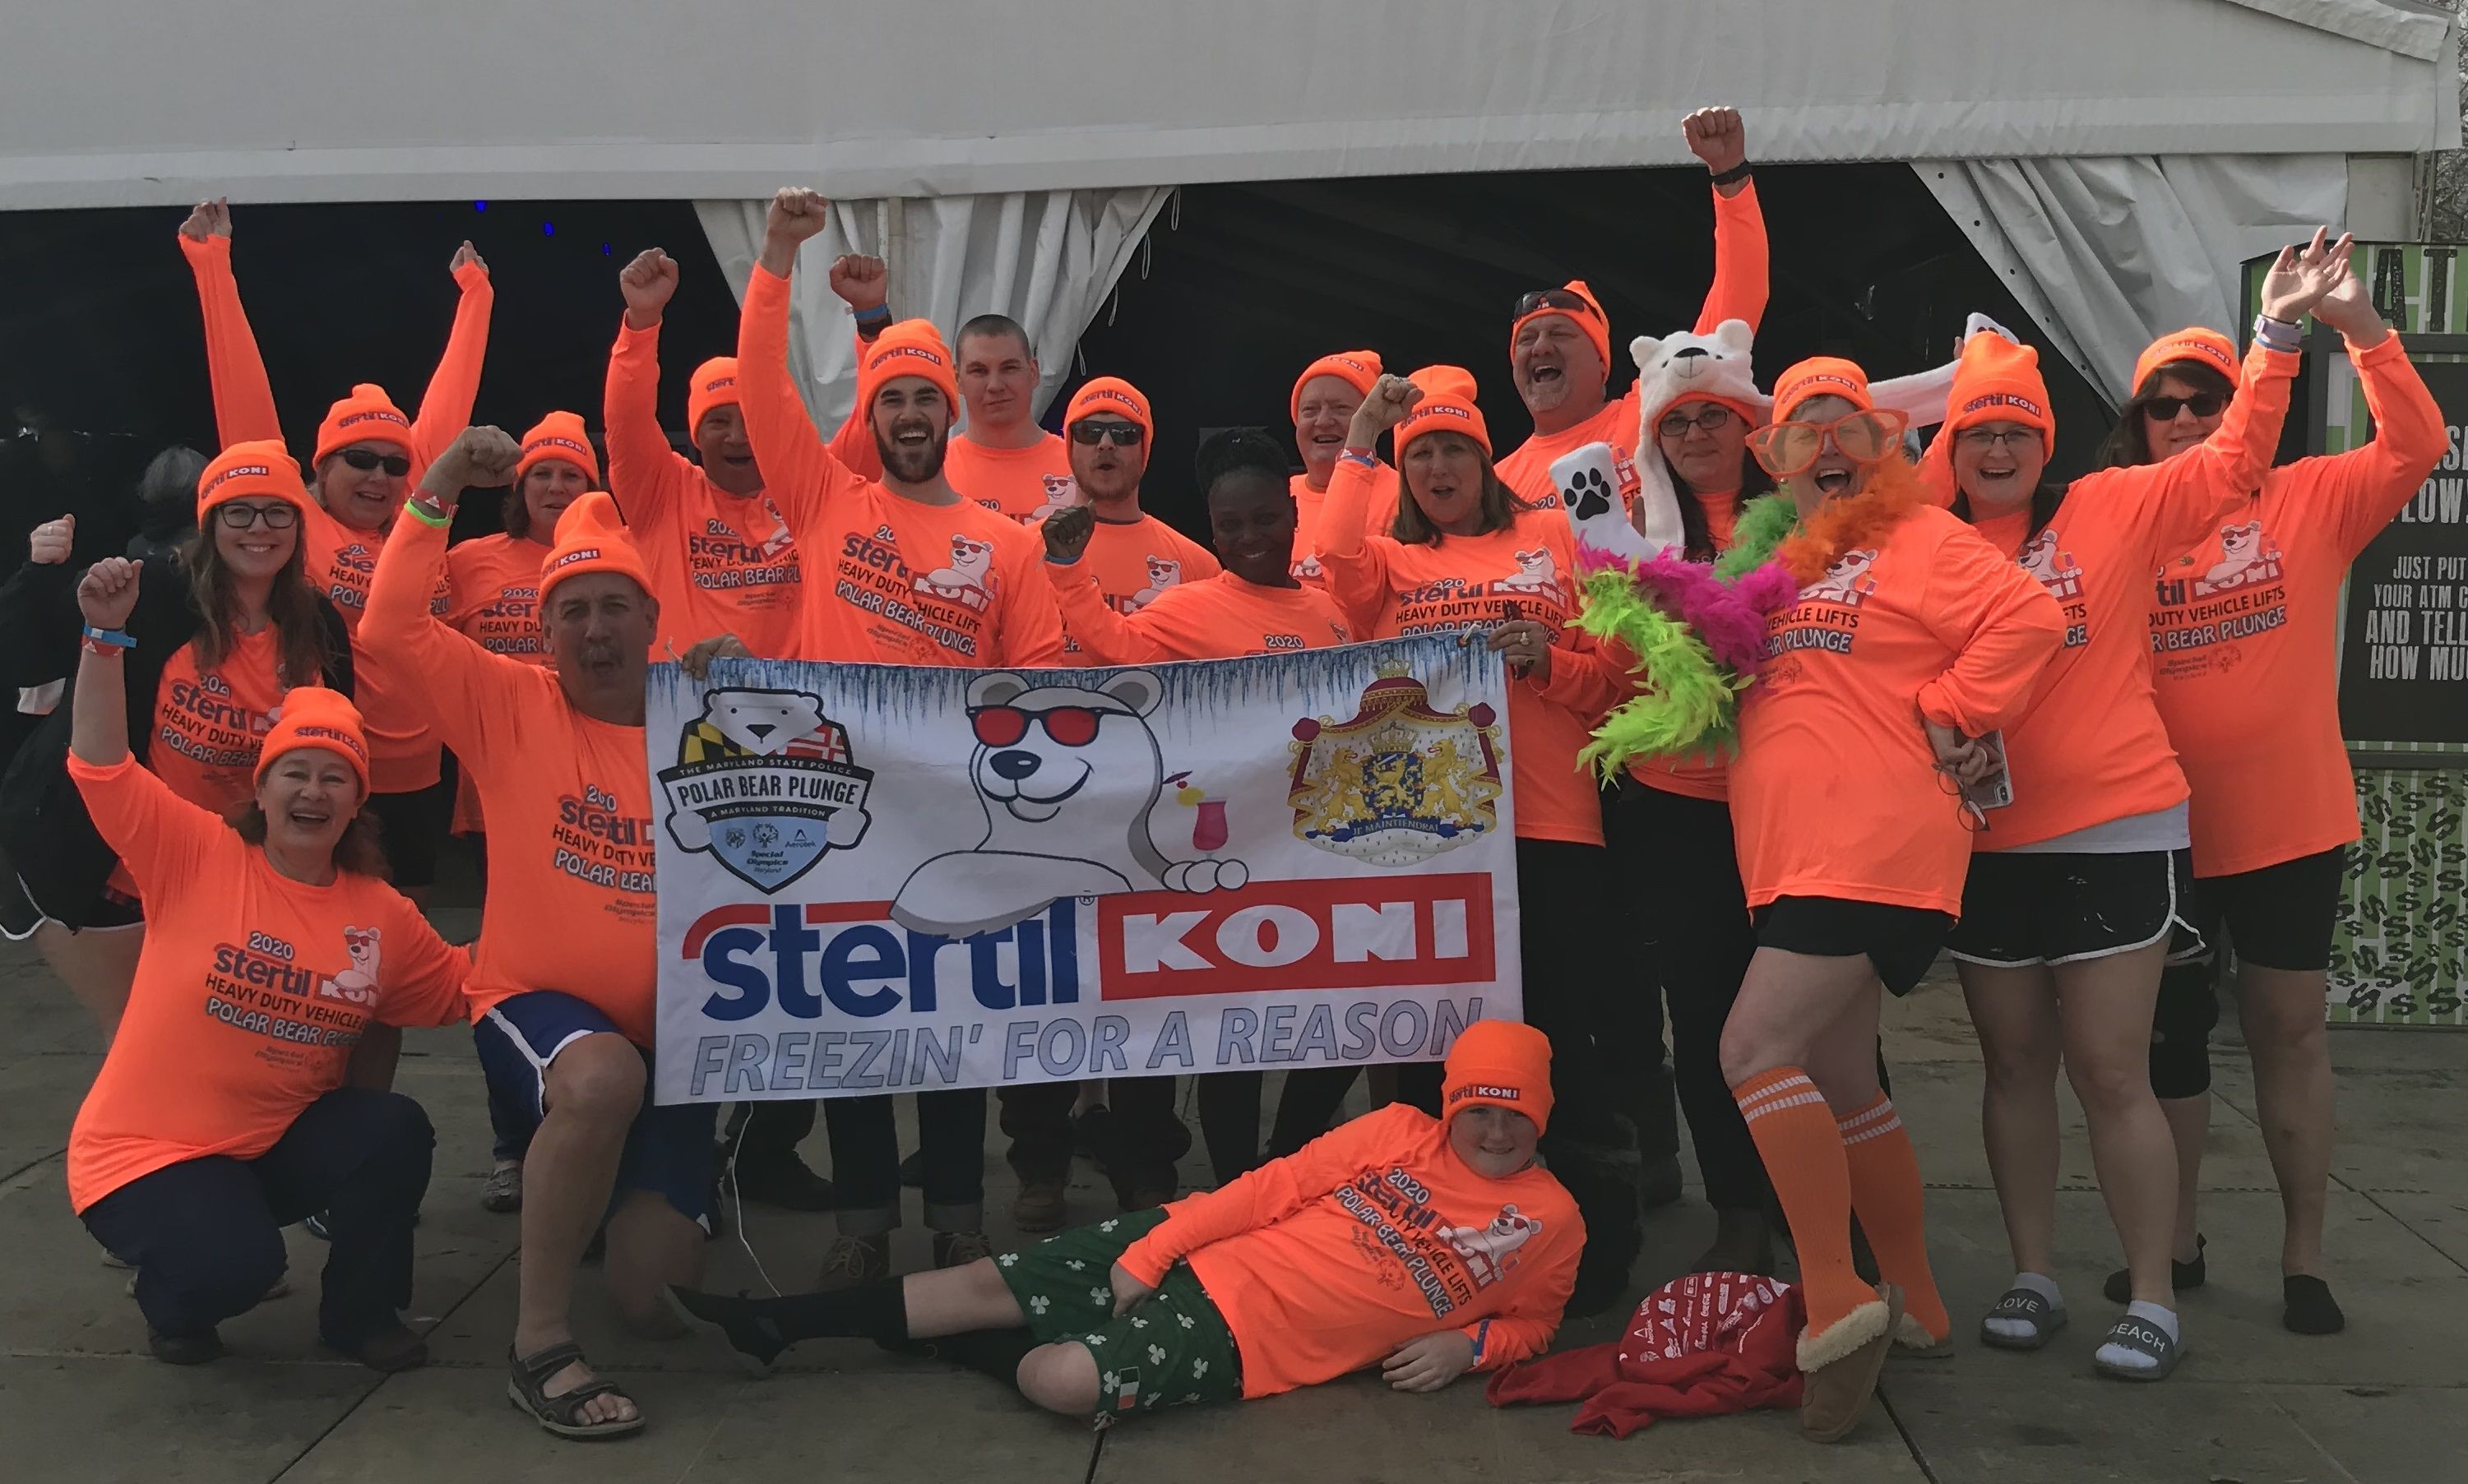 Stertil-Koni “plungers” totaled 28, doubling last year’s turnout